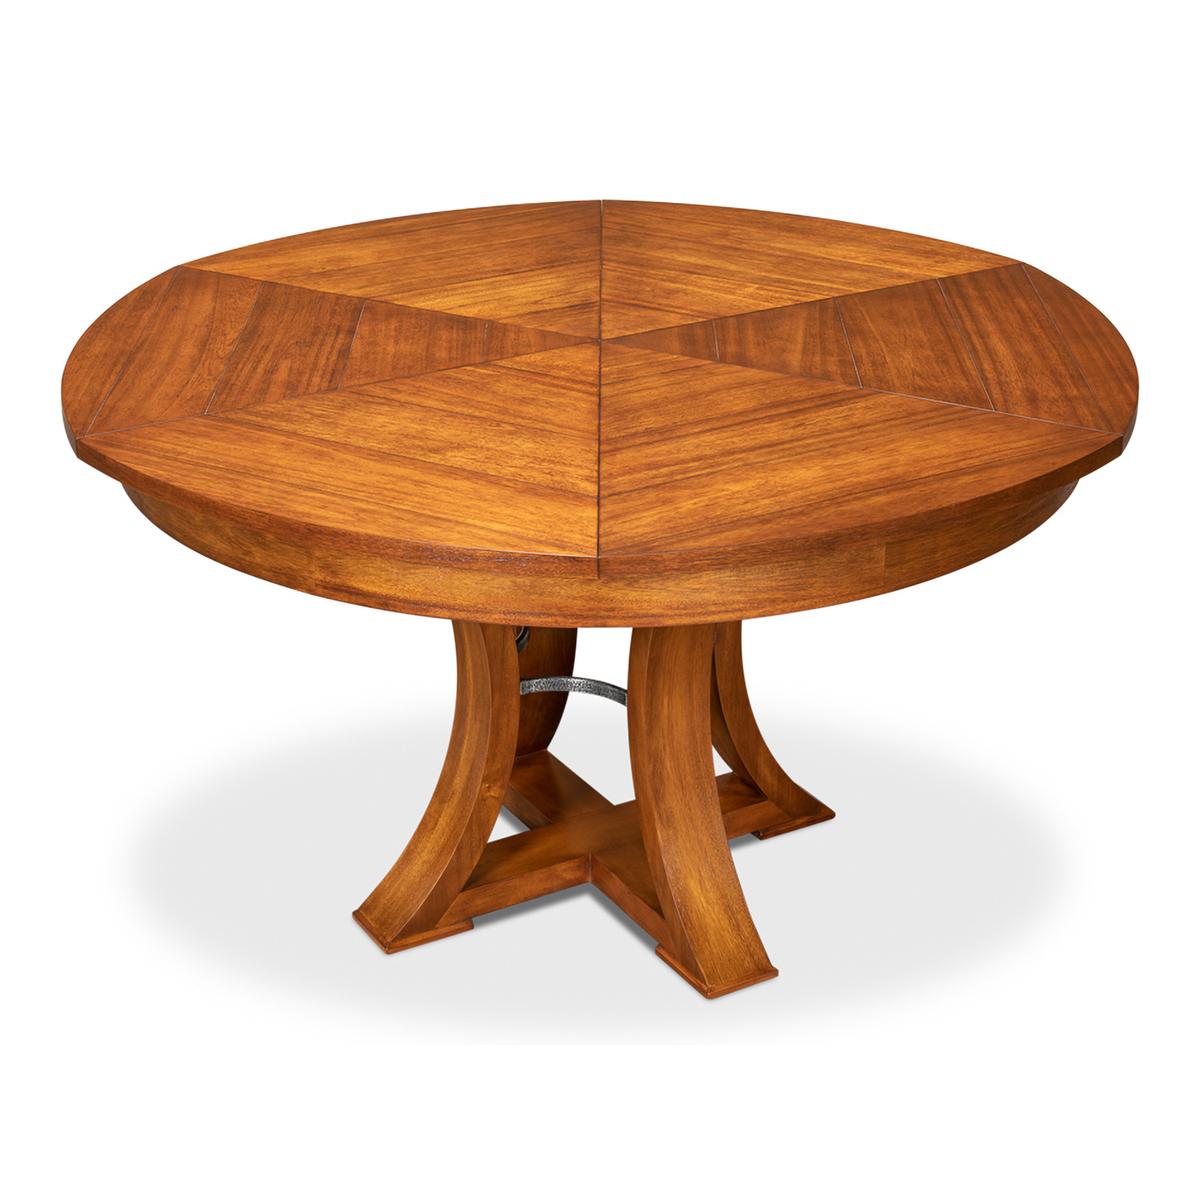 Contemporary Modern Transitional Dining Table, 70, Tobacco Finish For Sale